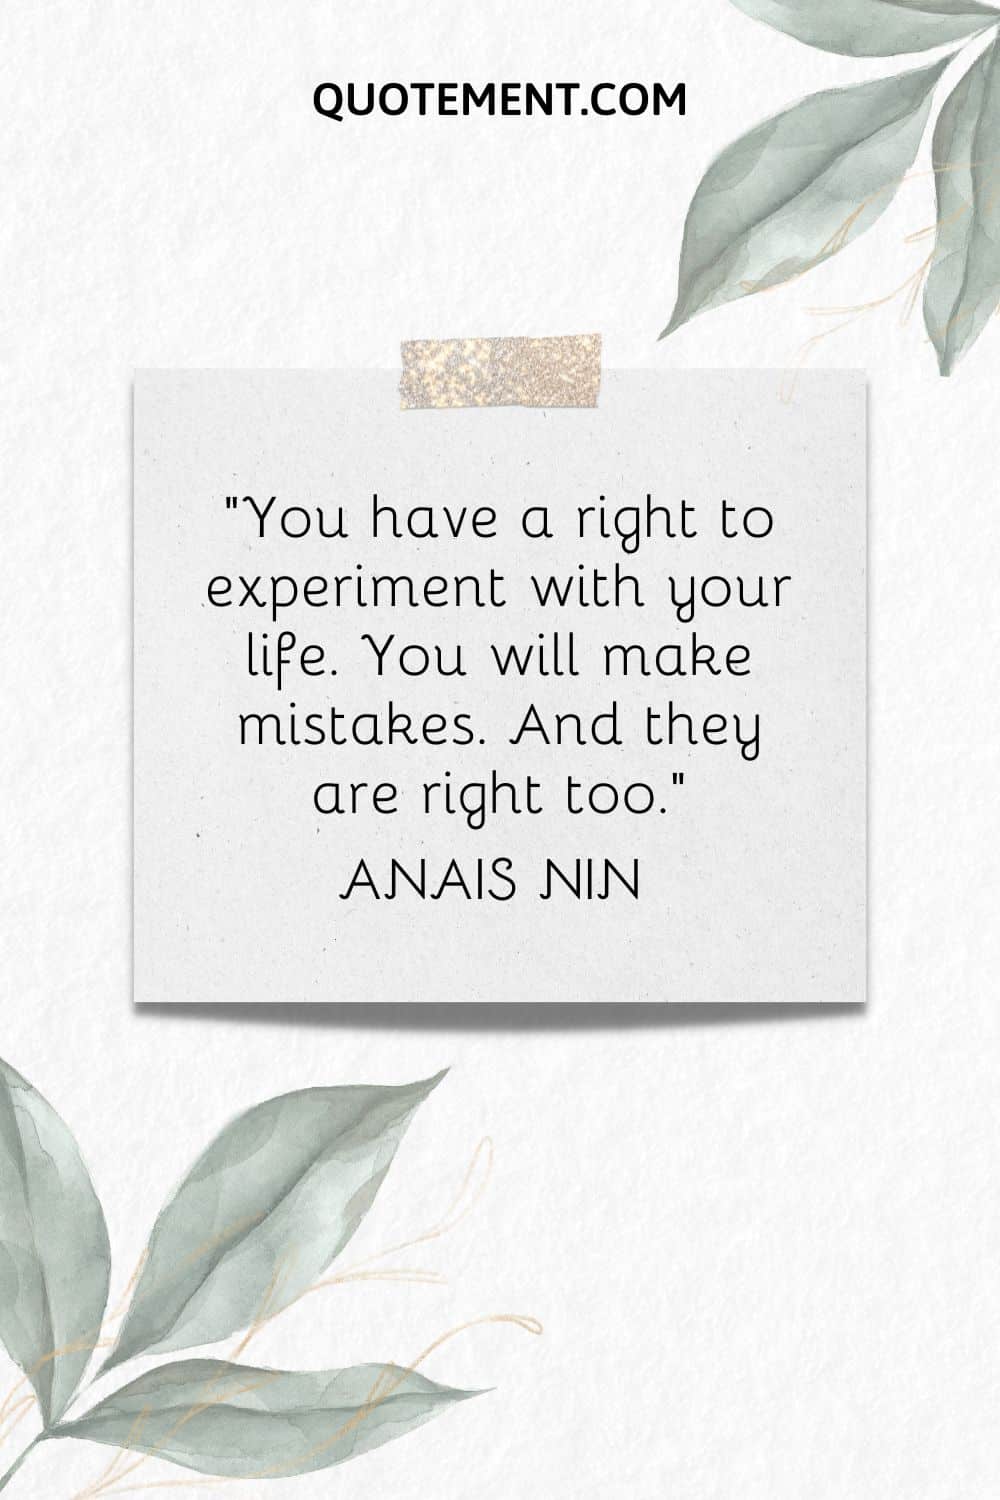 You have a right to experiment with your life. You will make mistakes. And they are right too. — Anais Nin